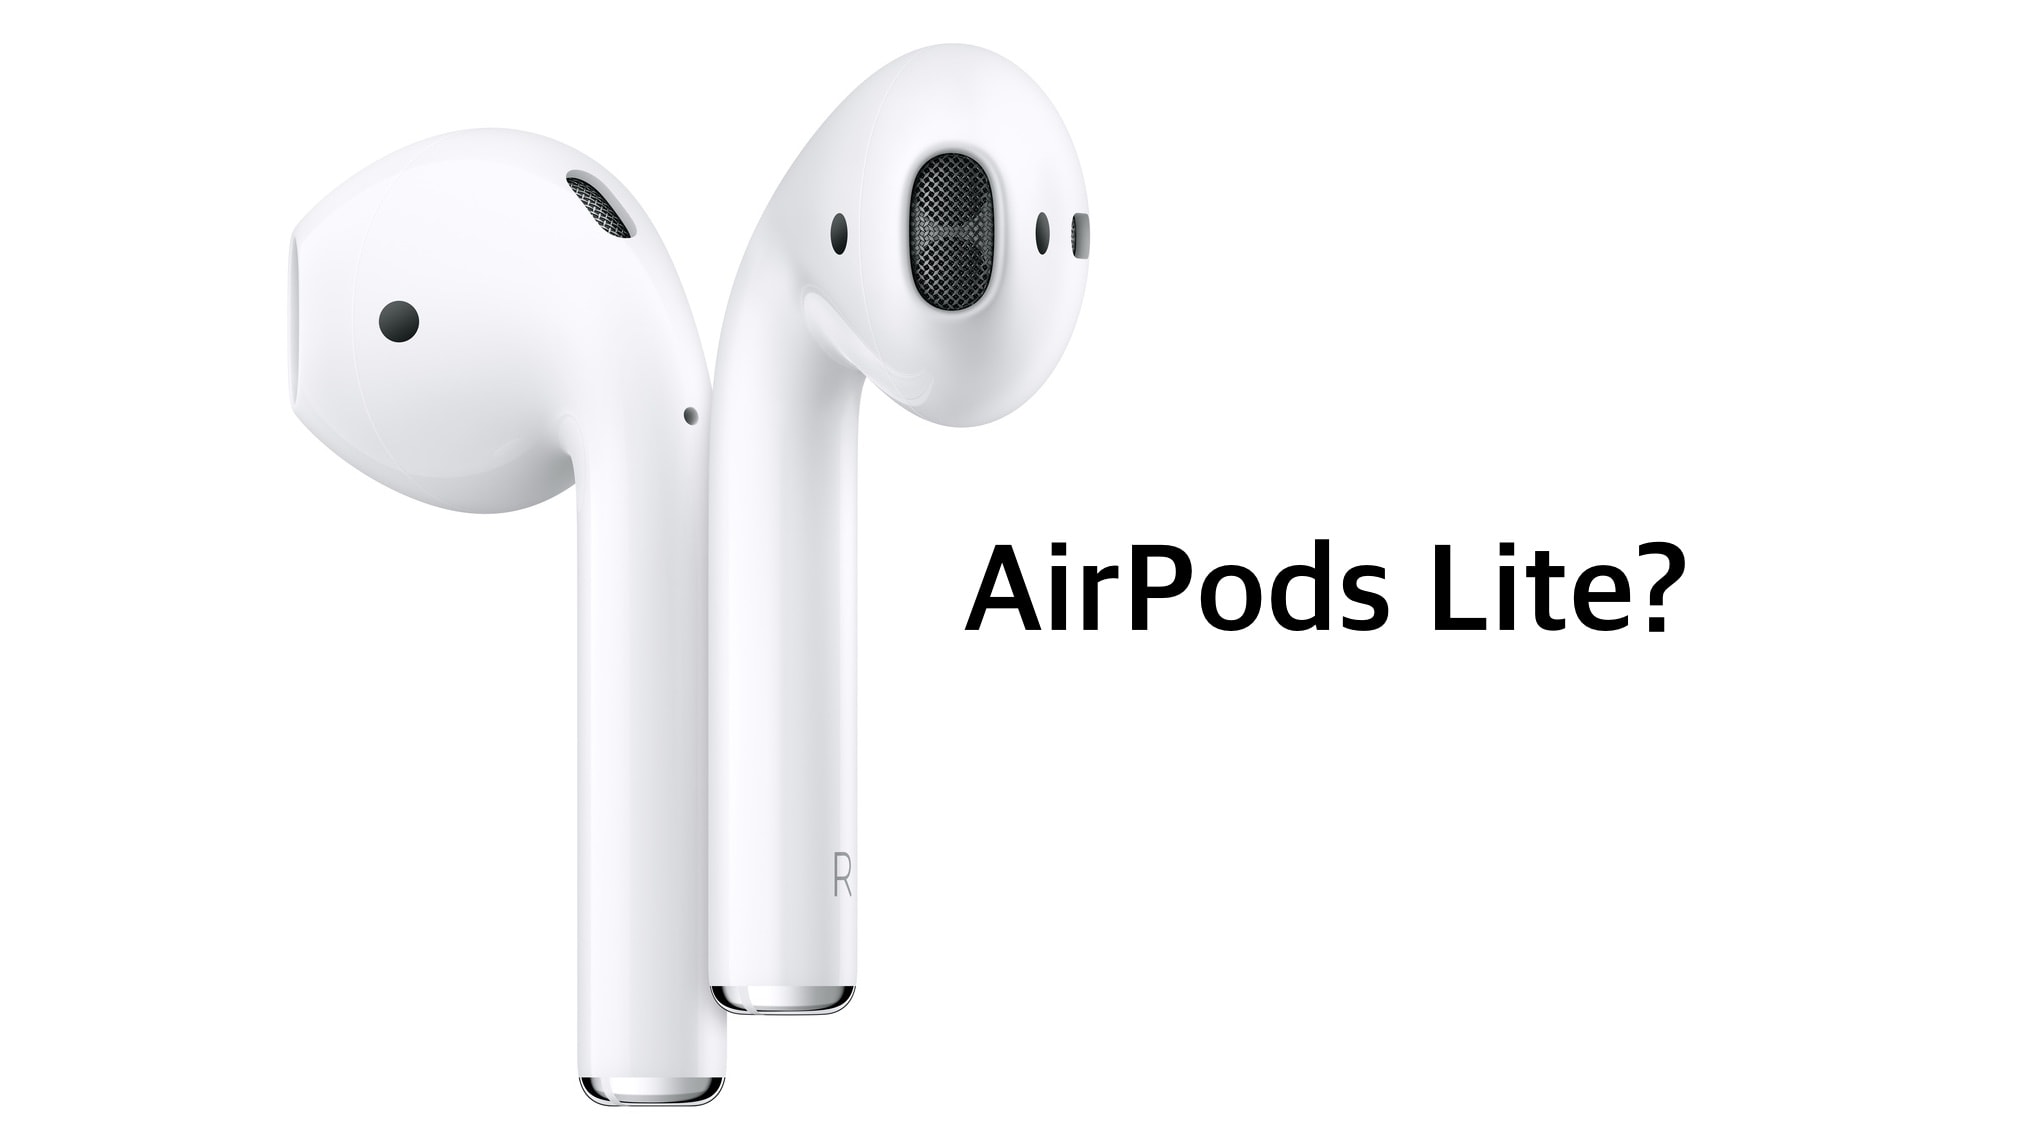 AirPods Lite could add key new feature: Affordability